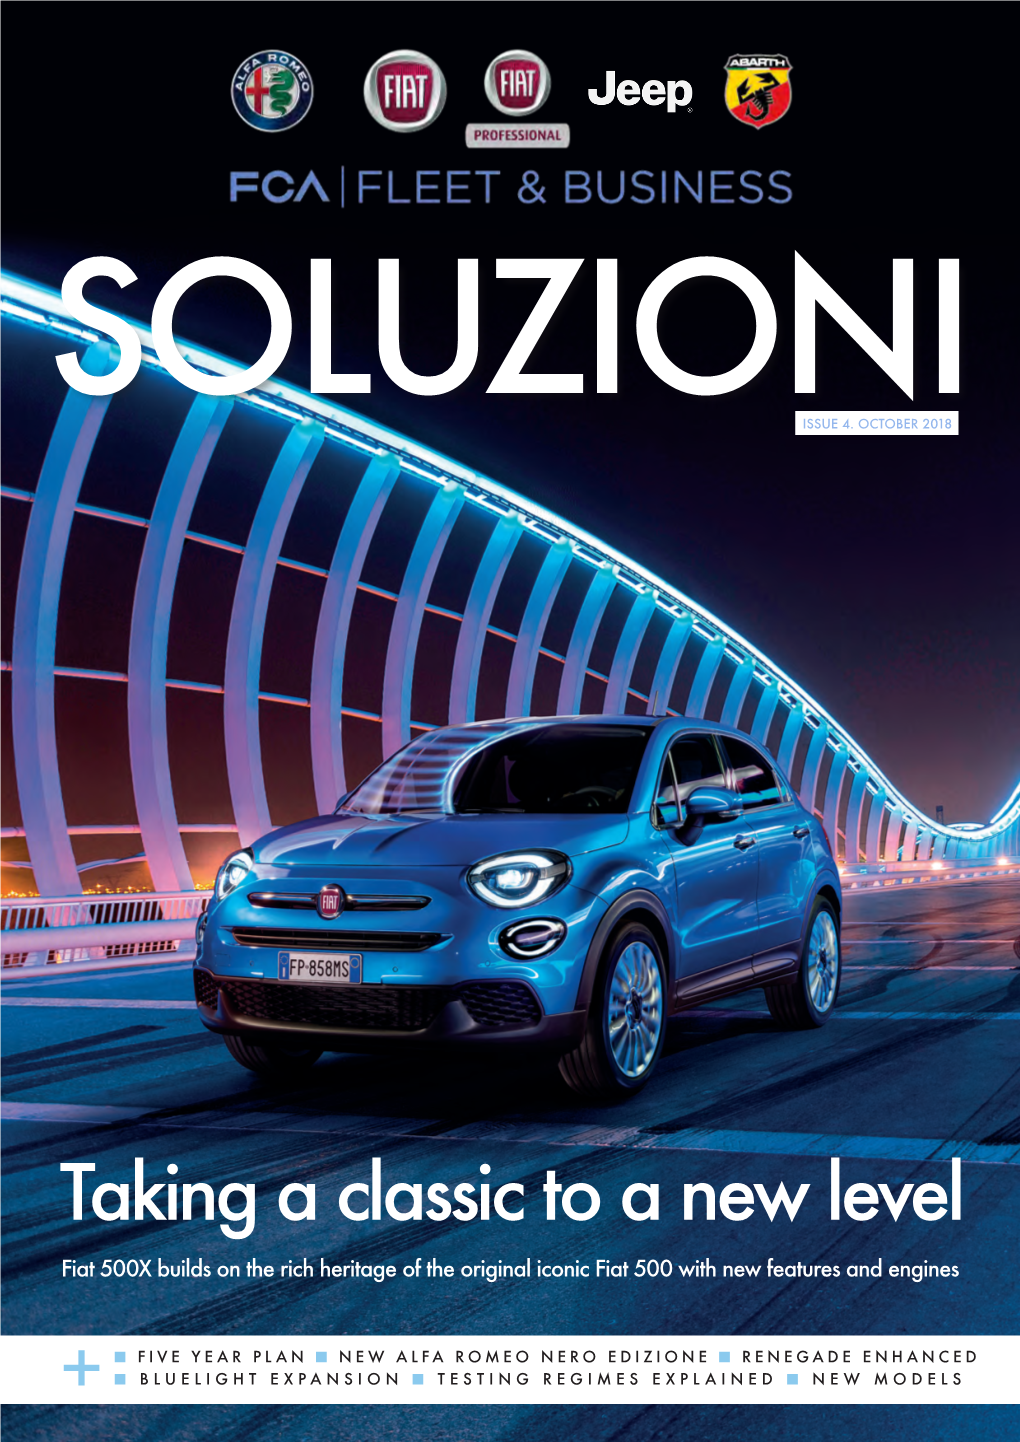 Taking a Classic to a New Level Fiat 500X Builds on the Rich Heritage of the Original Iconic Fiat 500 with New Features and Engines